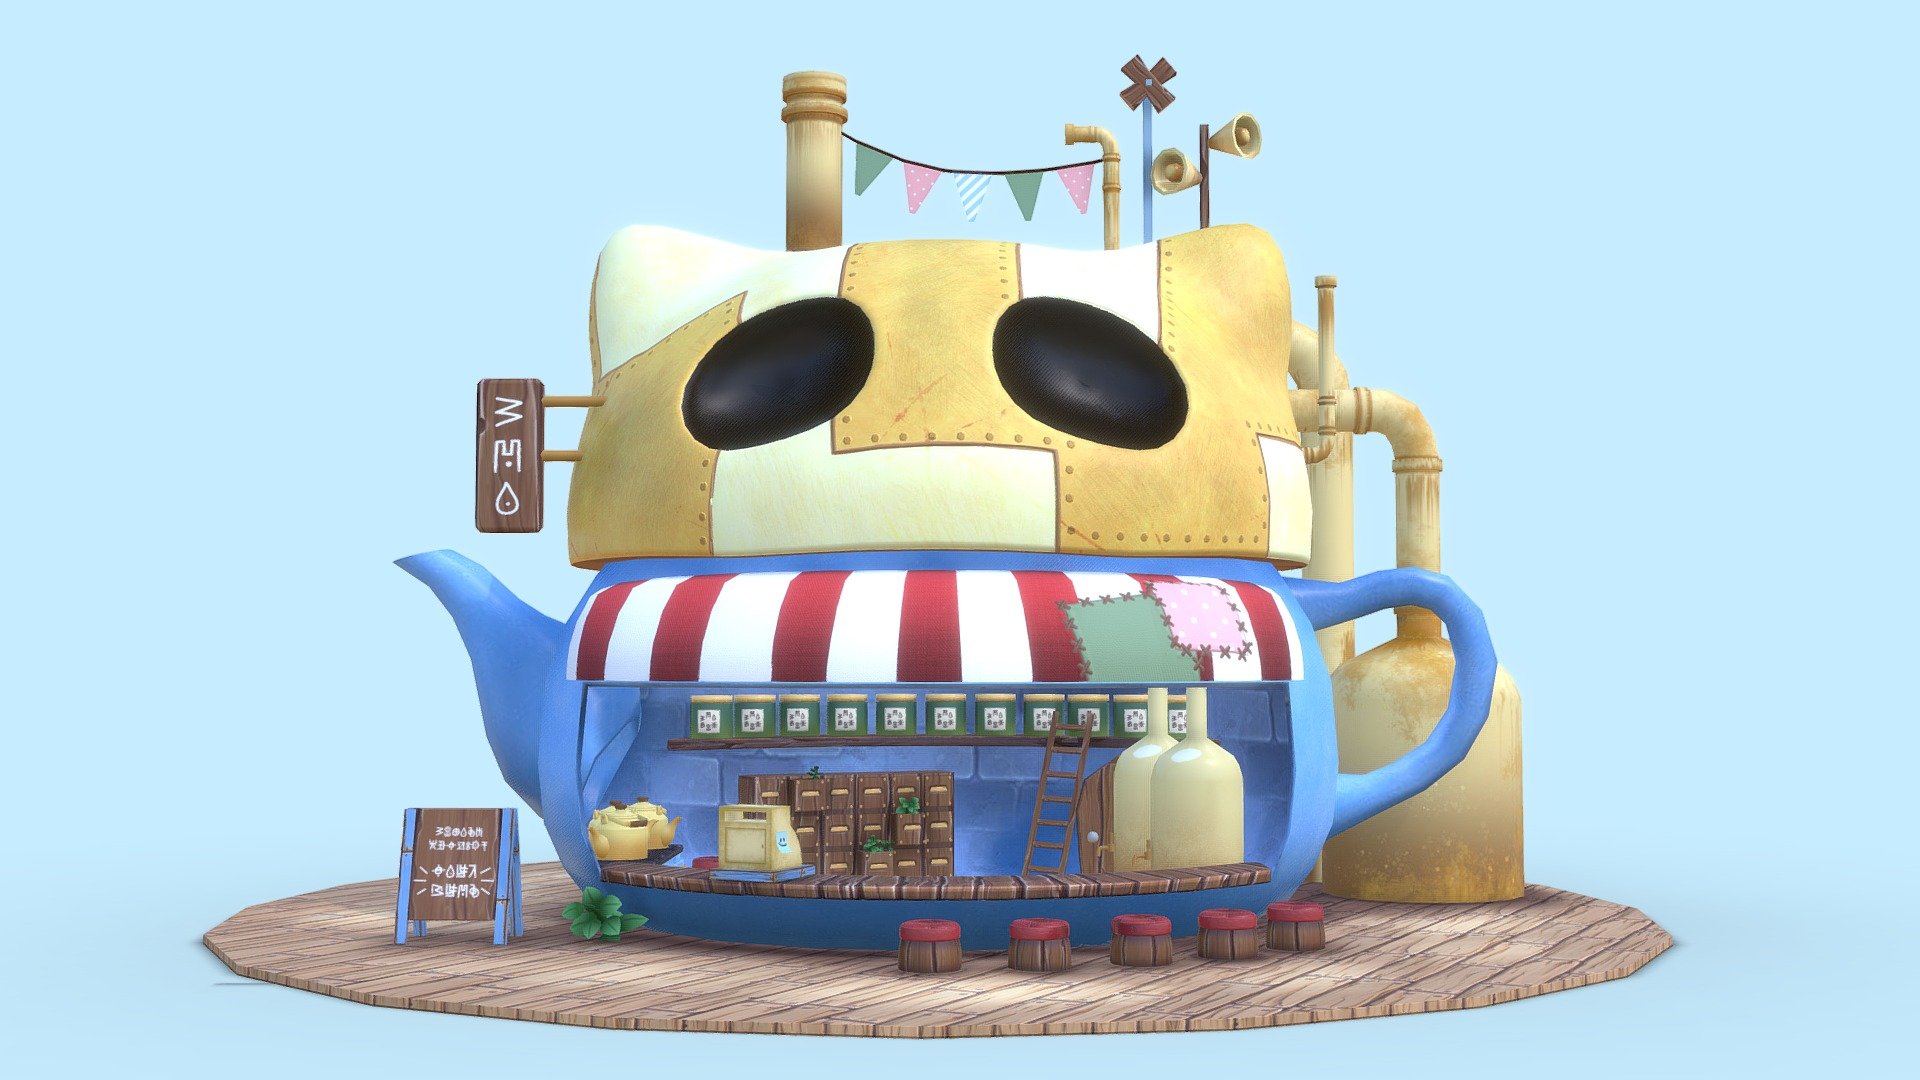 This is for my school assignment where we decided to create a game hub kind of world. This world contains creatures called patchers, and this tea house is in the middle of one of their rest stop islands!

Here's my idea sketch:
 - Tea House of the Patchers - 3D model by icebell 3d model